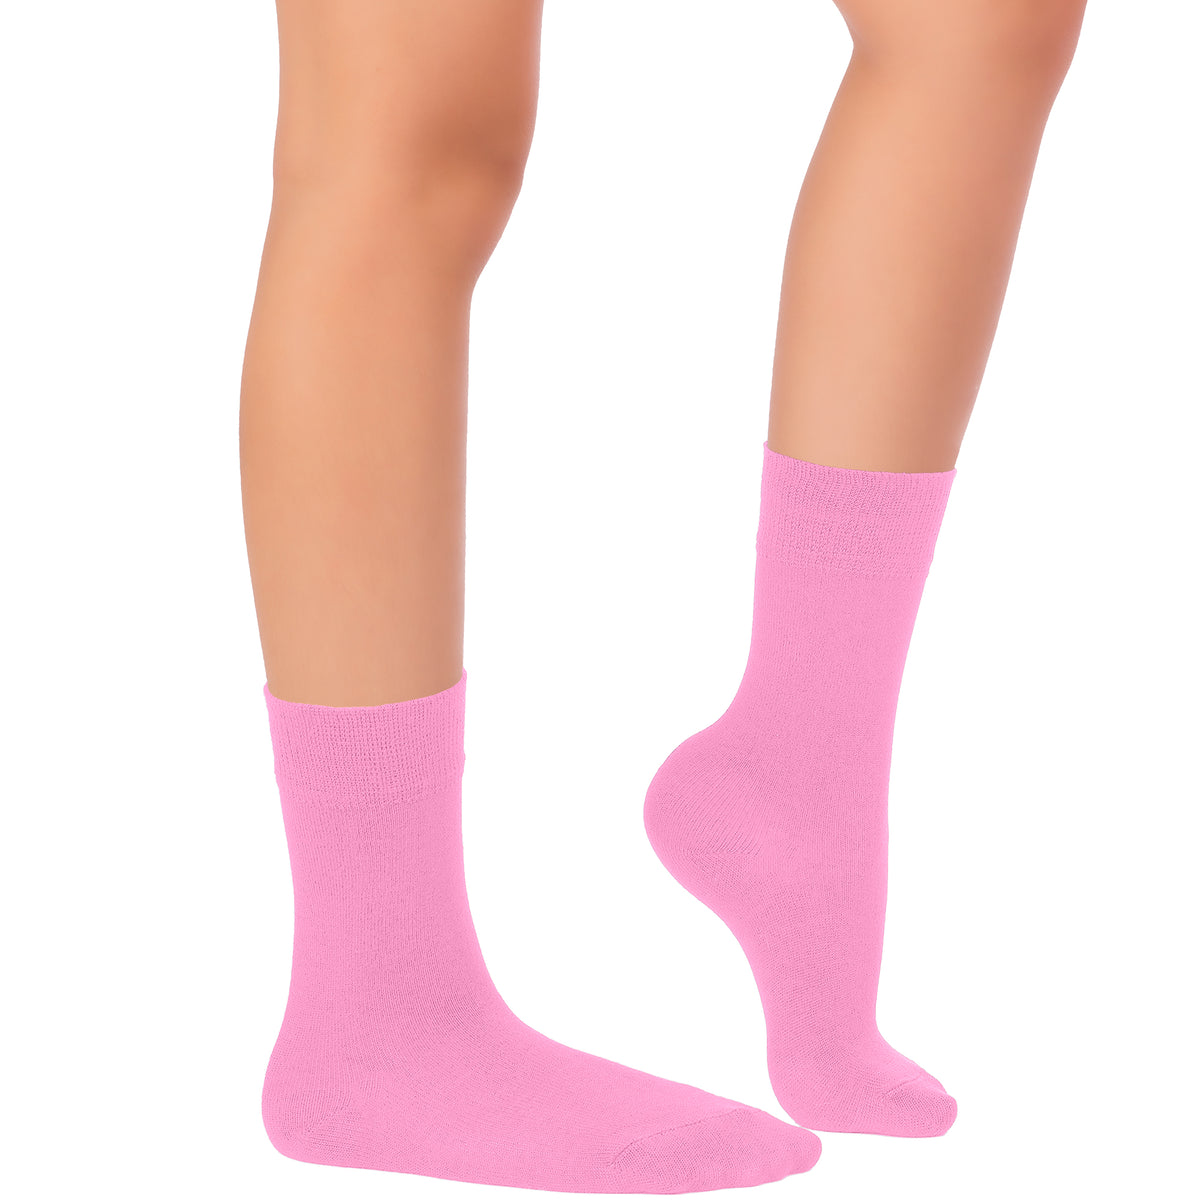 A photo of a woman's legs in pink socks against a white background. The socks are the 'Kids' Dress Crew Bamboo' style.